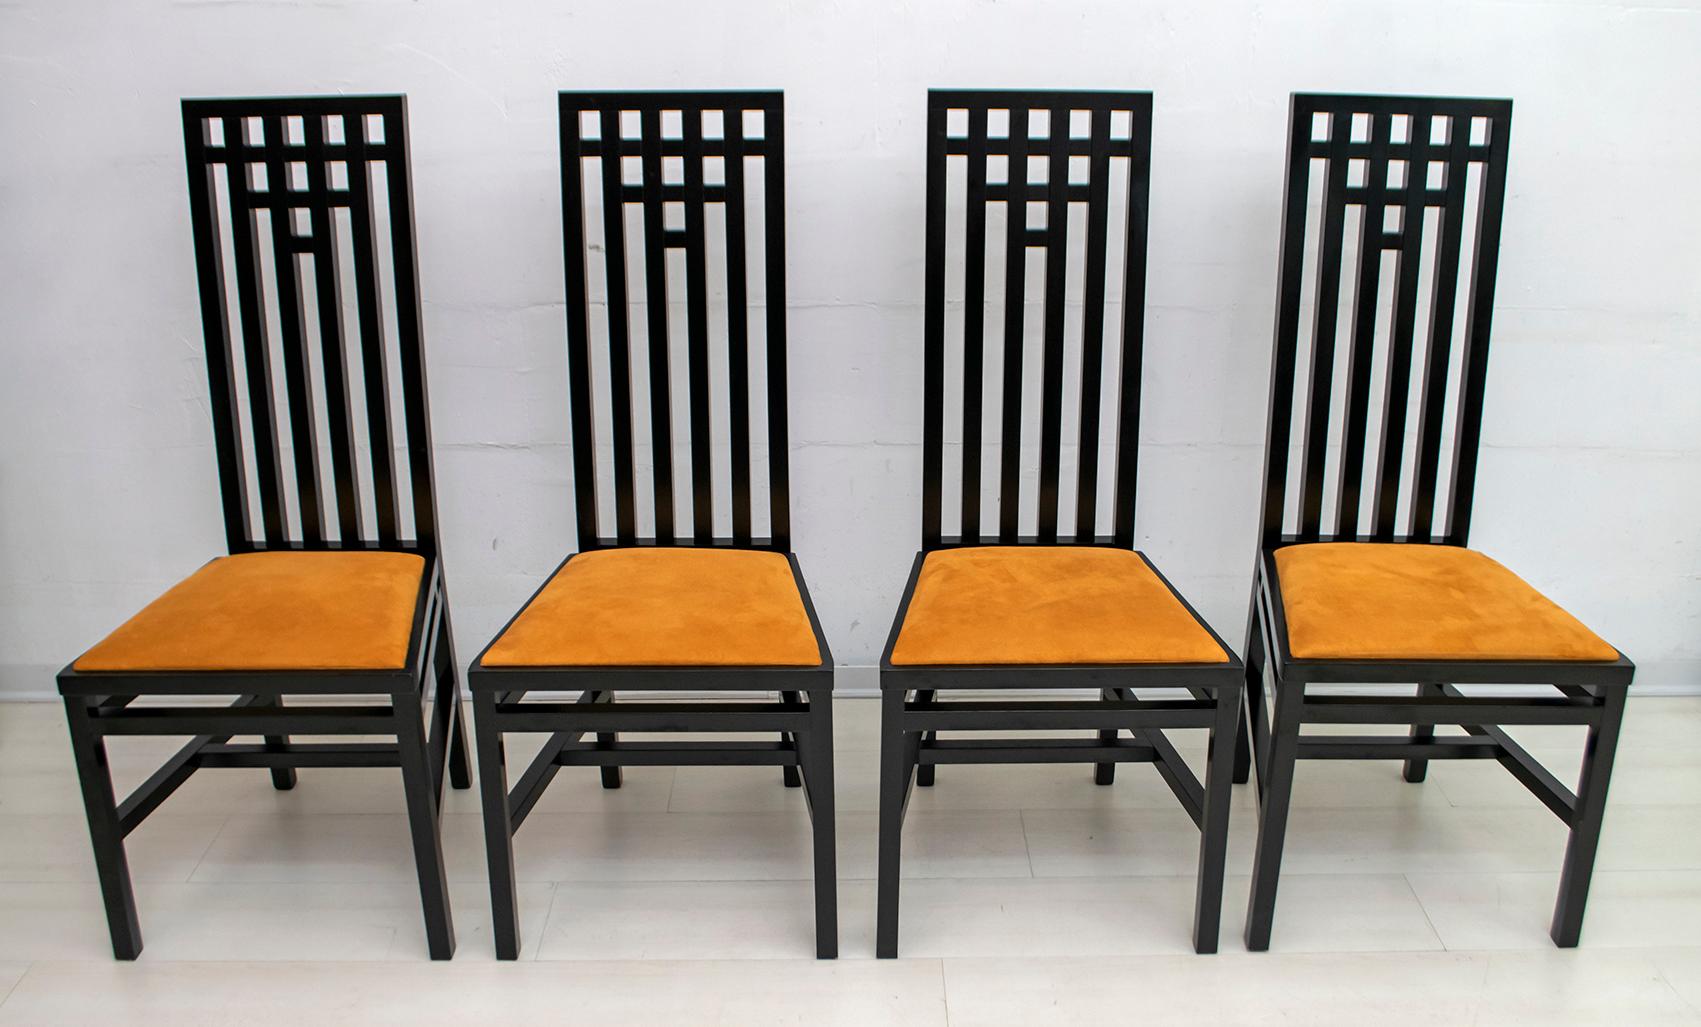 In the style of the Scottish architect Charles Rennie Mackintosh. These four chairs, solidly constructed of black lacquered wood, with orange microfiber upholstery, late 1970s.